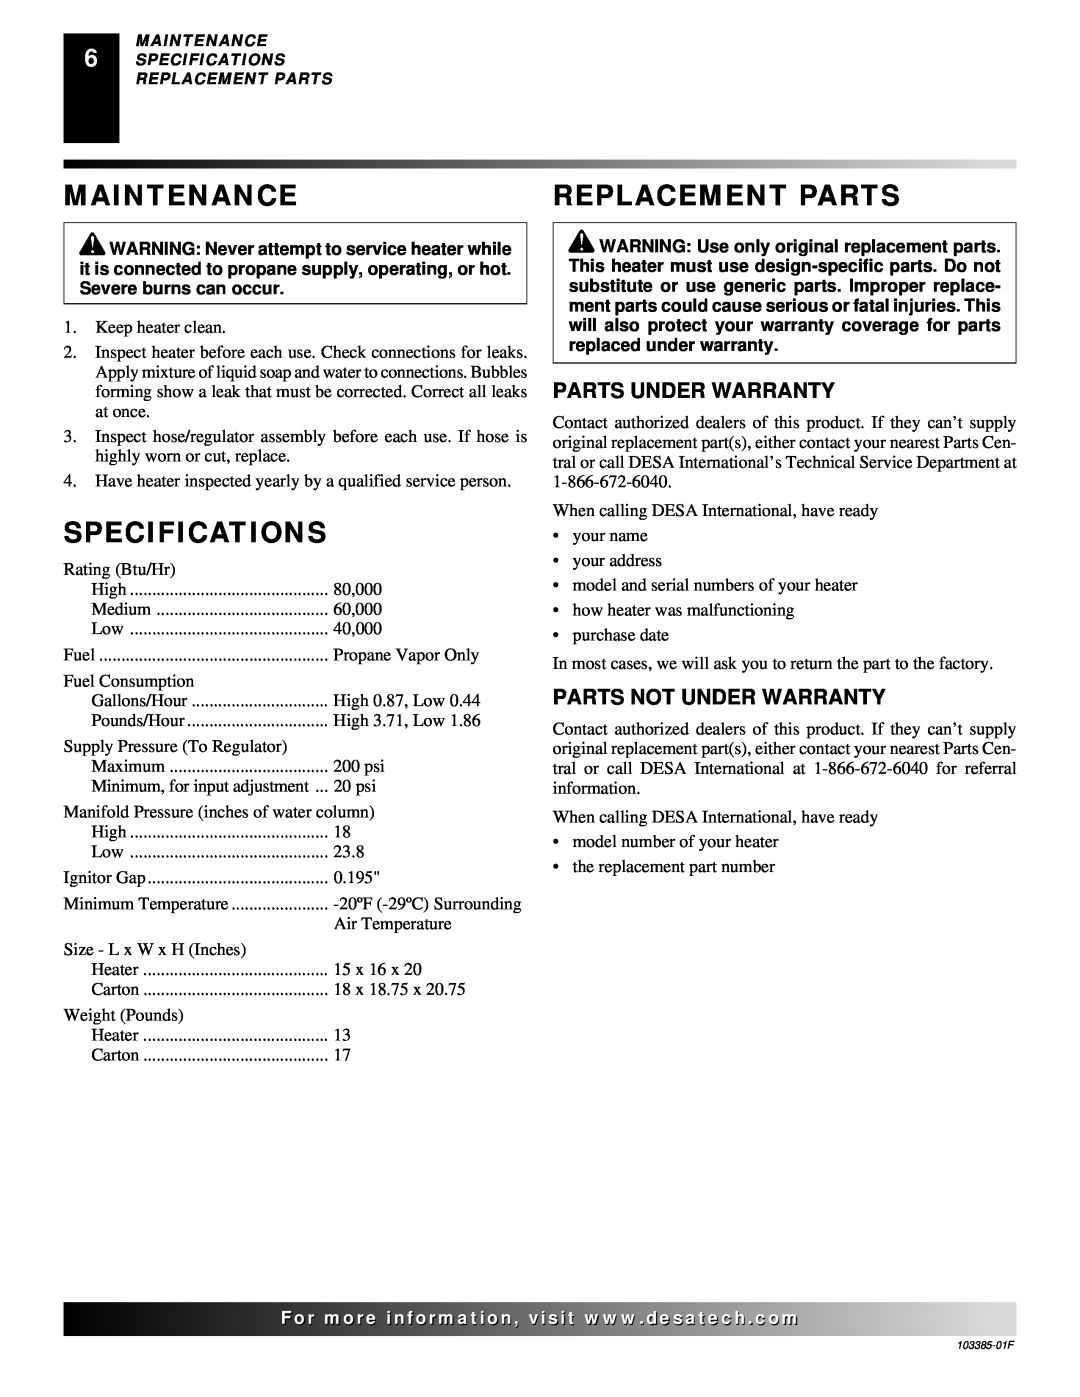 Desa 40, 80, 60 owner manual Maintenance, Replacement Parts, Specifications, Parts Under Warranty, Parts Not Under Warranty 